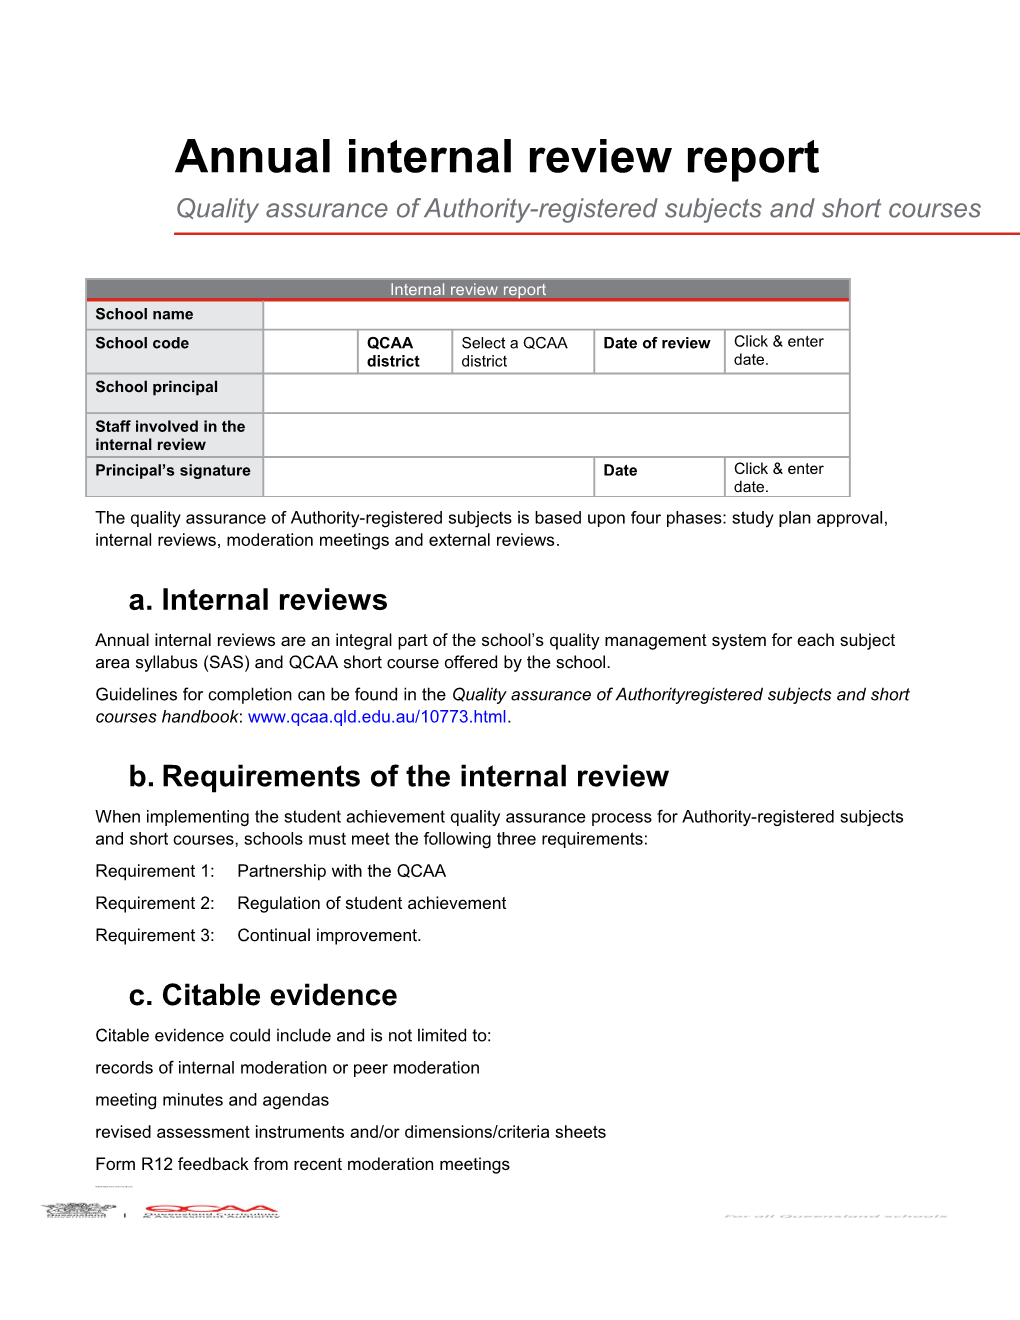 Annual Internal Review Report: Quality Assurance of Authority-Registered Subjects and Short